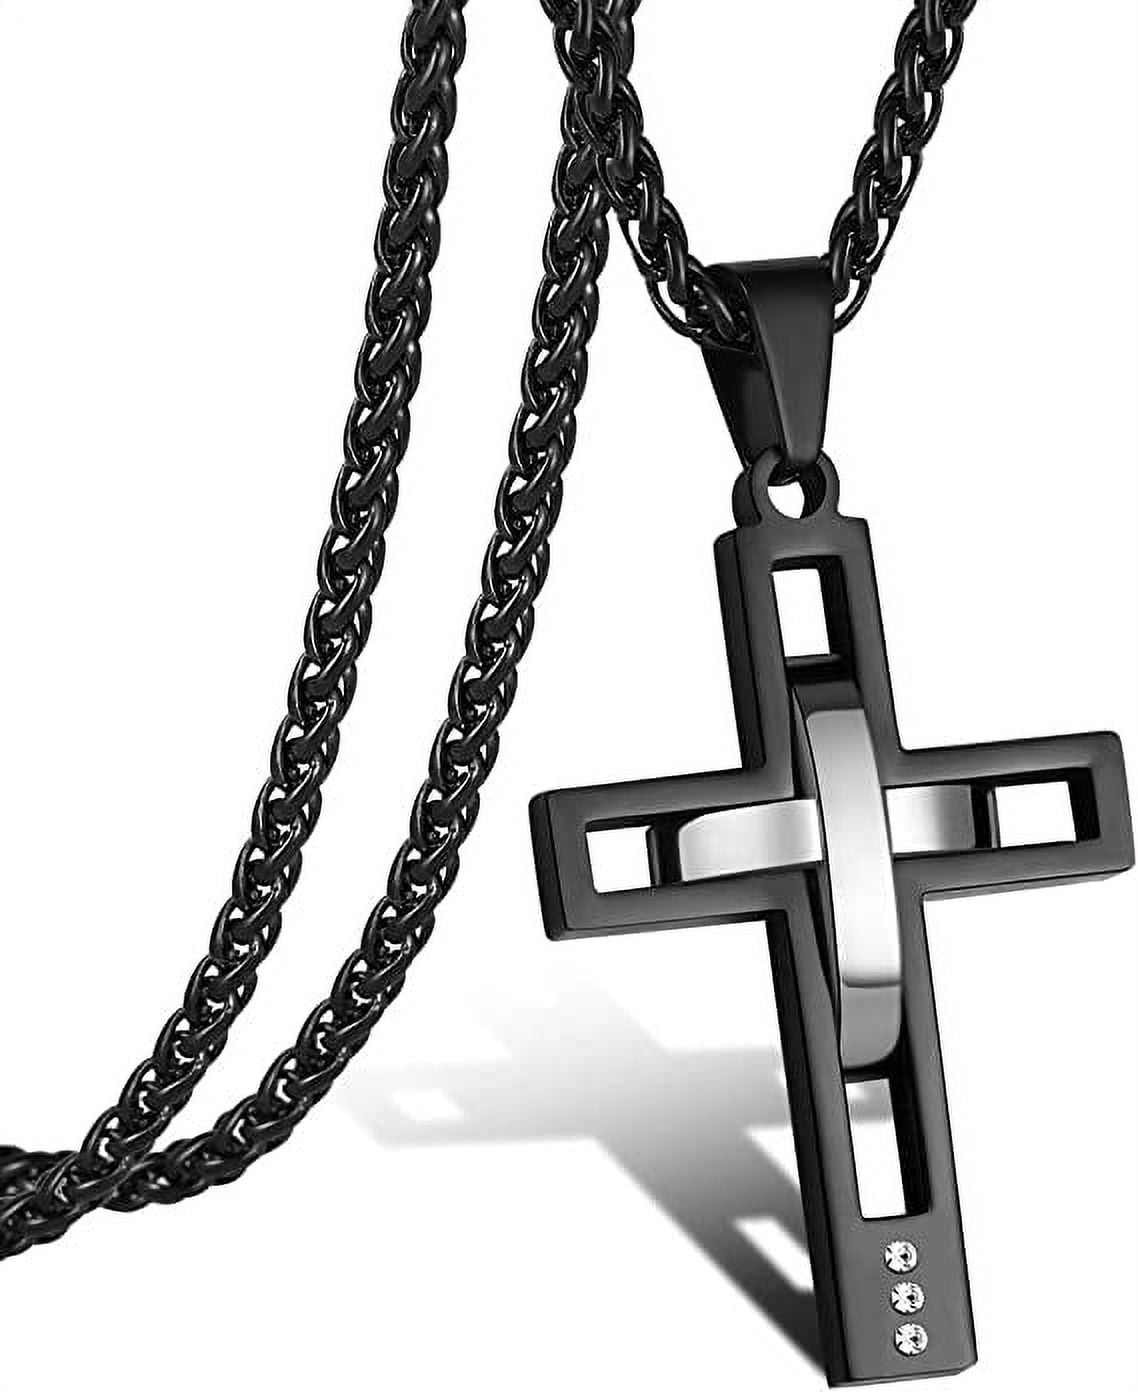 Necklace Set: Black Rope Chain and Medium Black Cross — WE ARE ALL